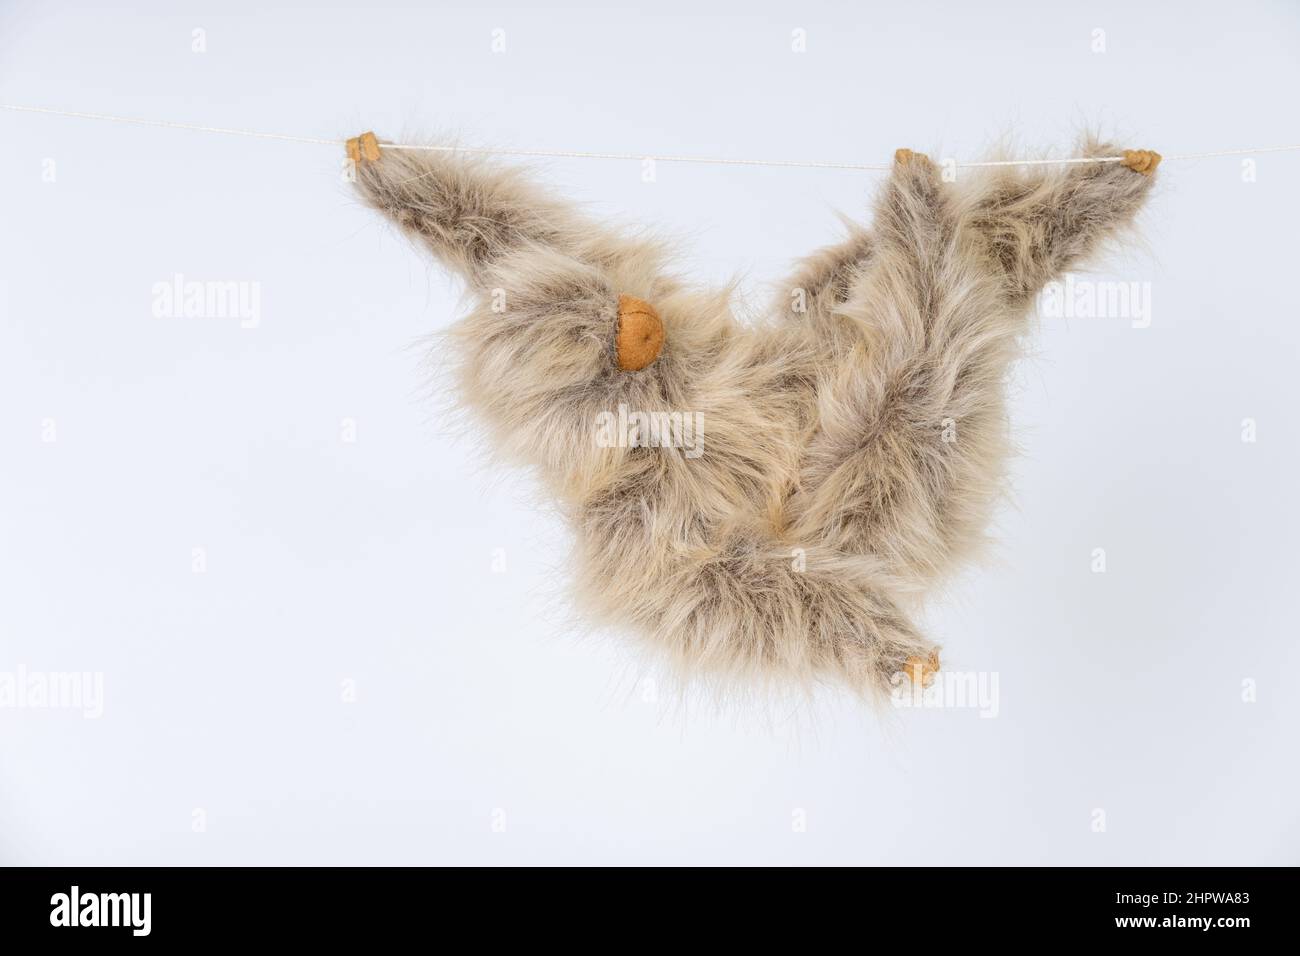 Stuffed animal Linnaeus's Two-toed Sloth hanging from a string Stock Photo